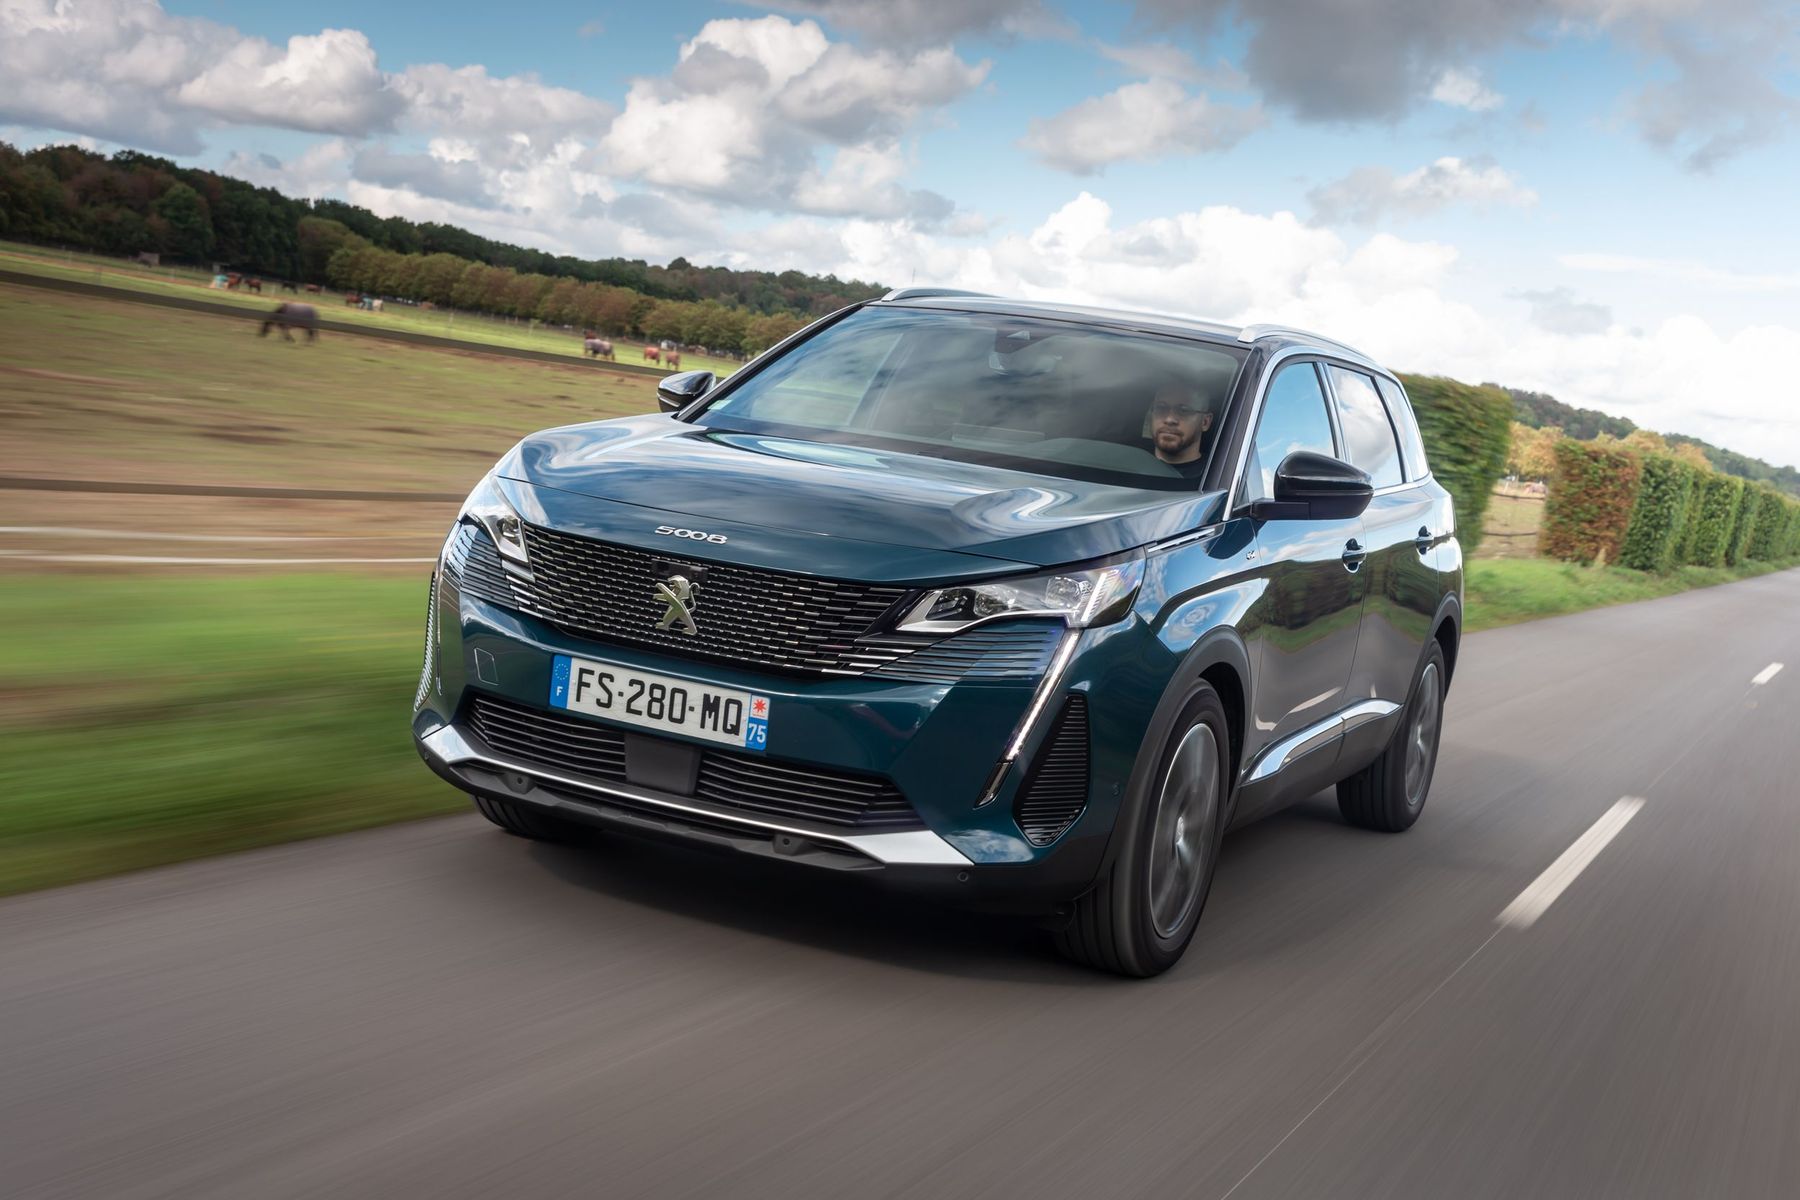 Peugeot 5008 gets a refresh for 2020